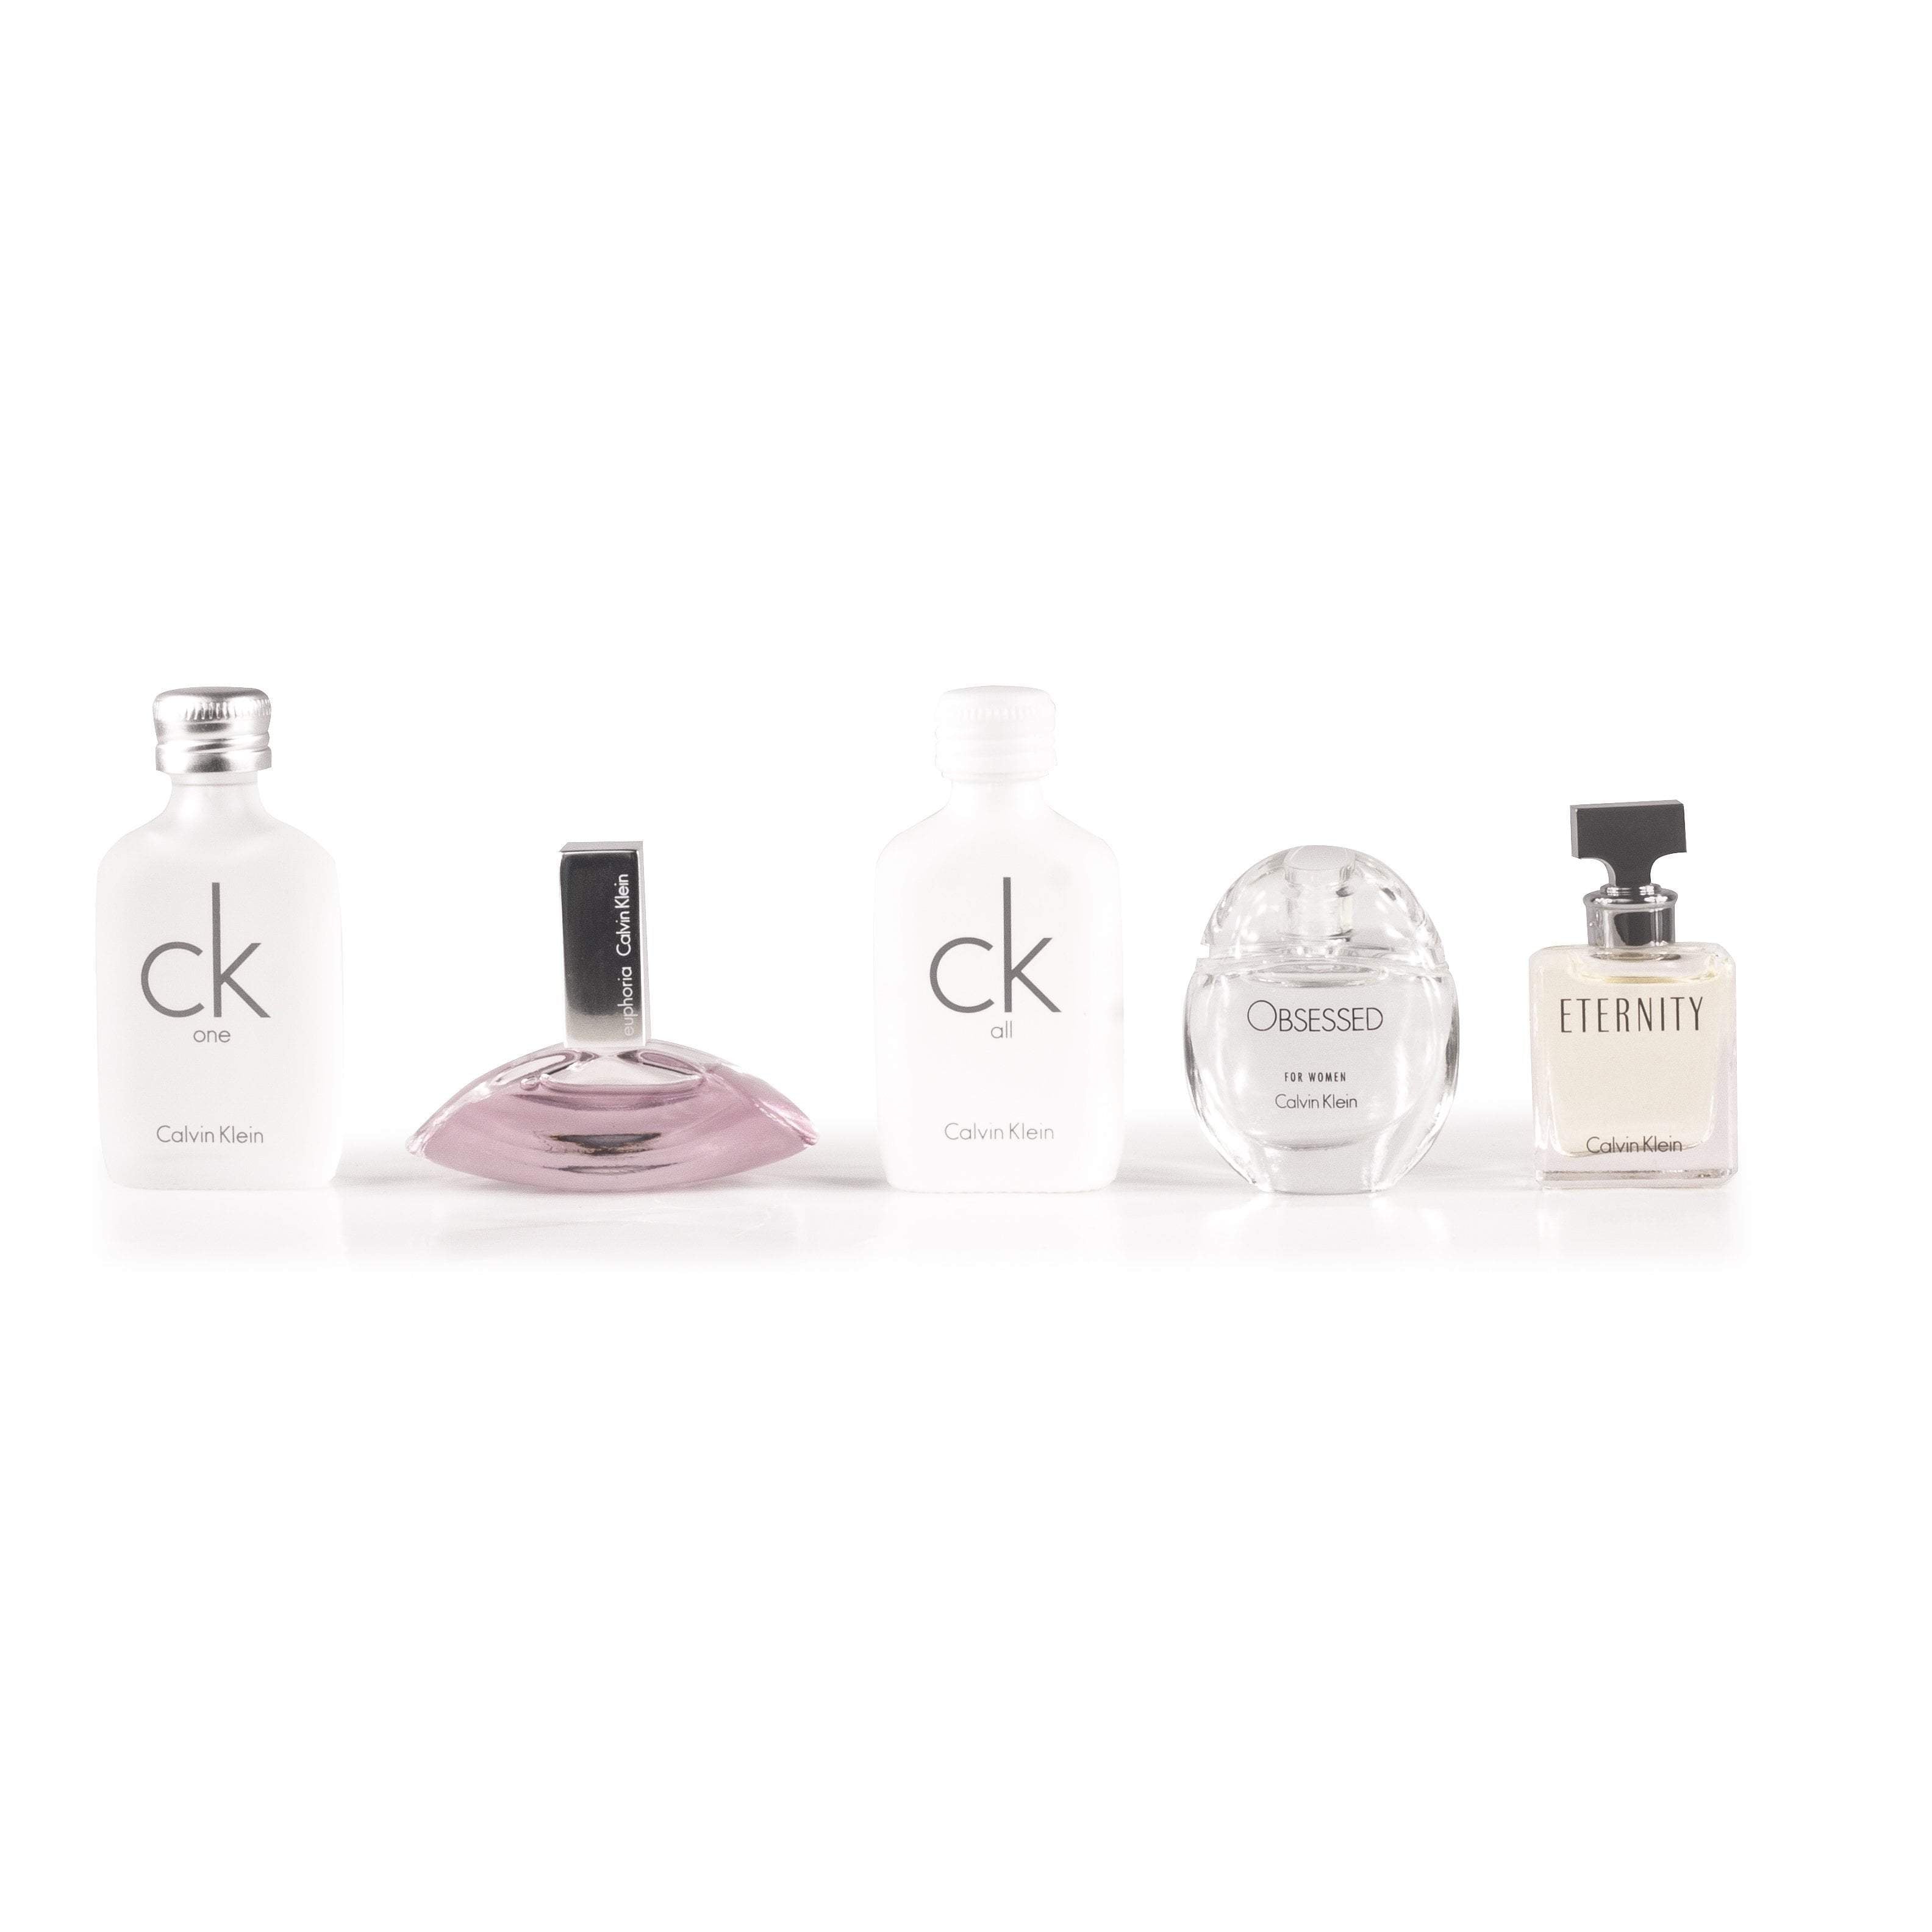 Calvin Klein Miniature Perfume Gift Set For Women - The online shopping  beauty store. Shop for makeup, skincare, haircare & fragrances online at  Chhotu Di Hatti.